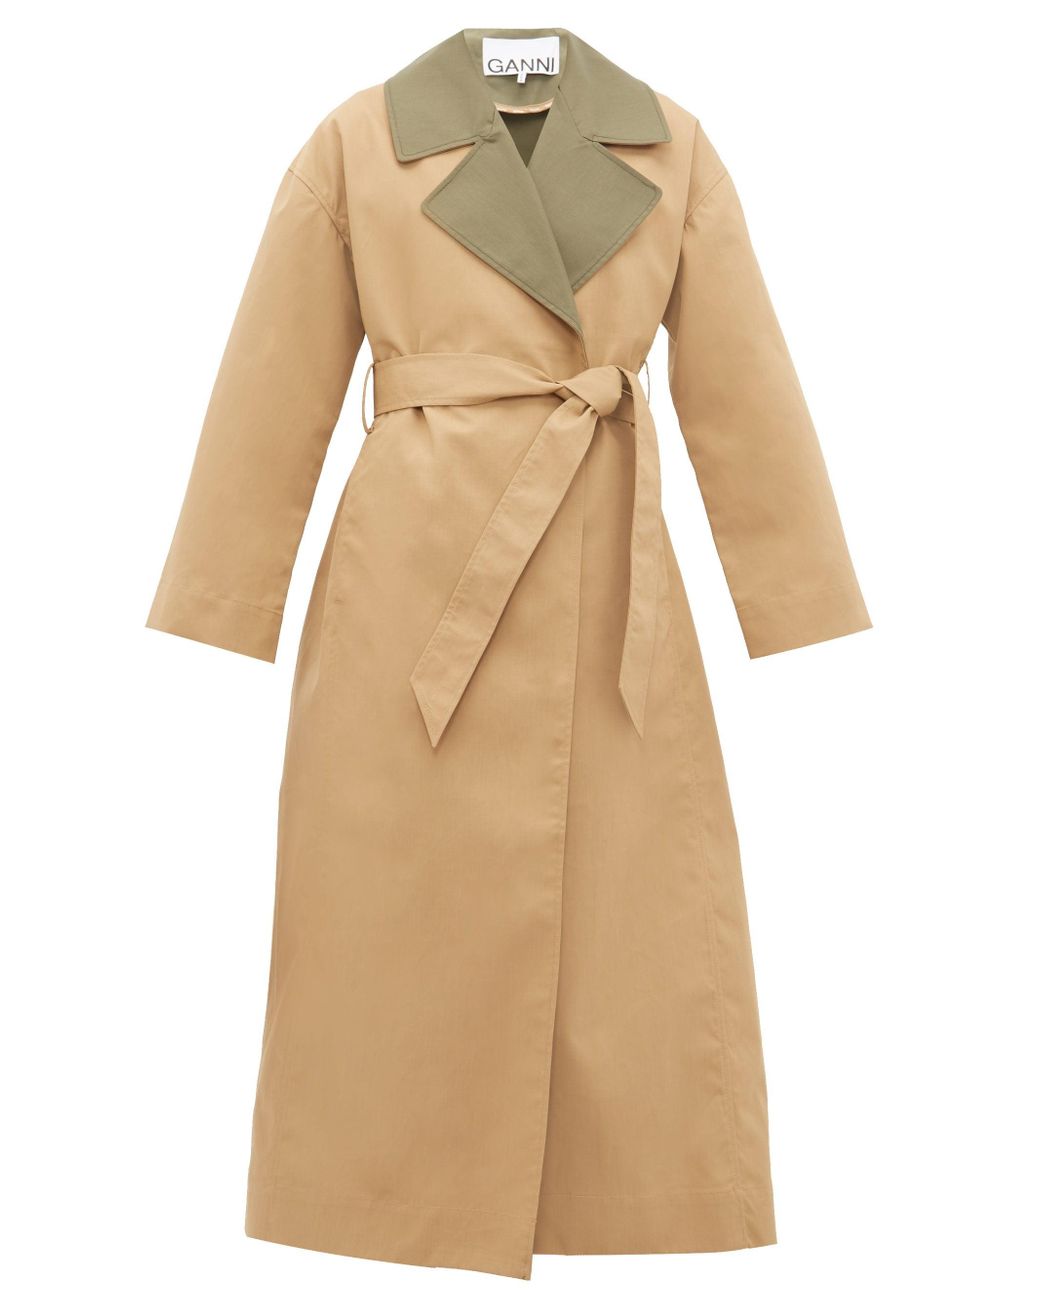 Ganni Contrast Collar Tie-waist Trench Coat in Natural | Lyst